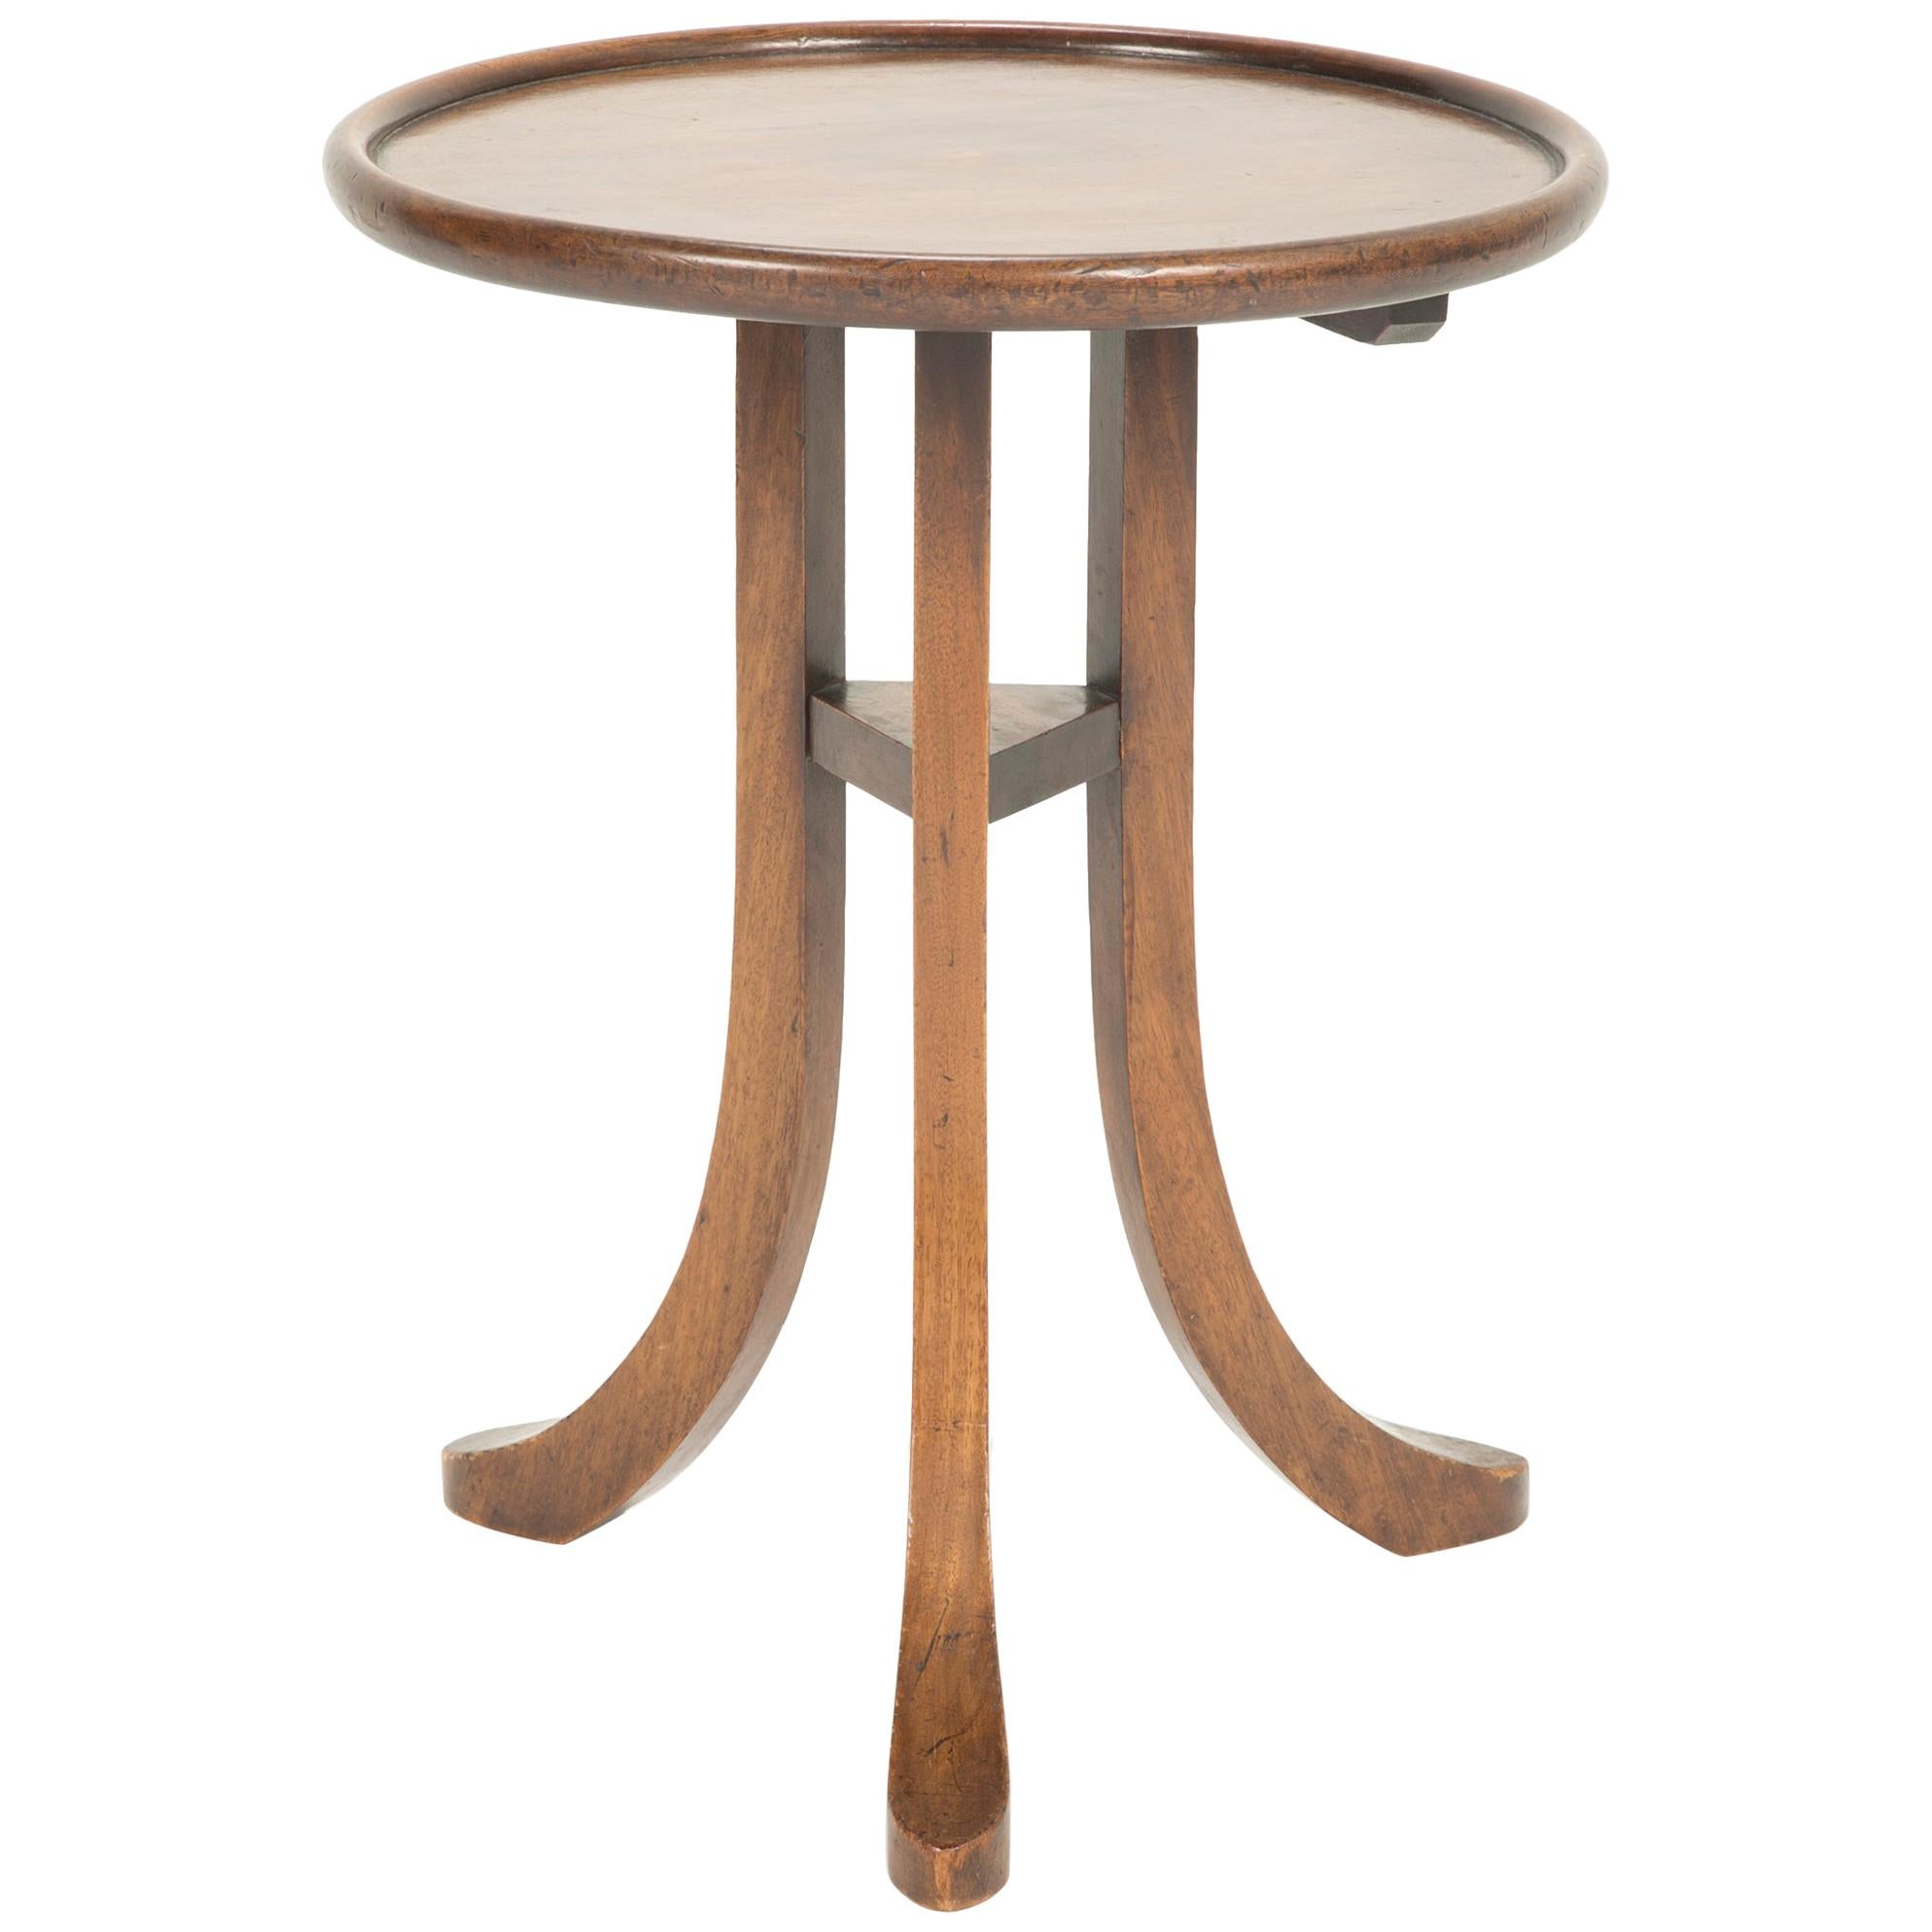 Liberty & Co. "Wylye" Mahogany Cocktail Table, Unmarked